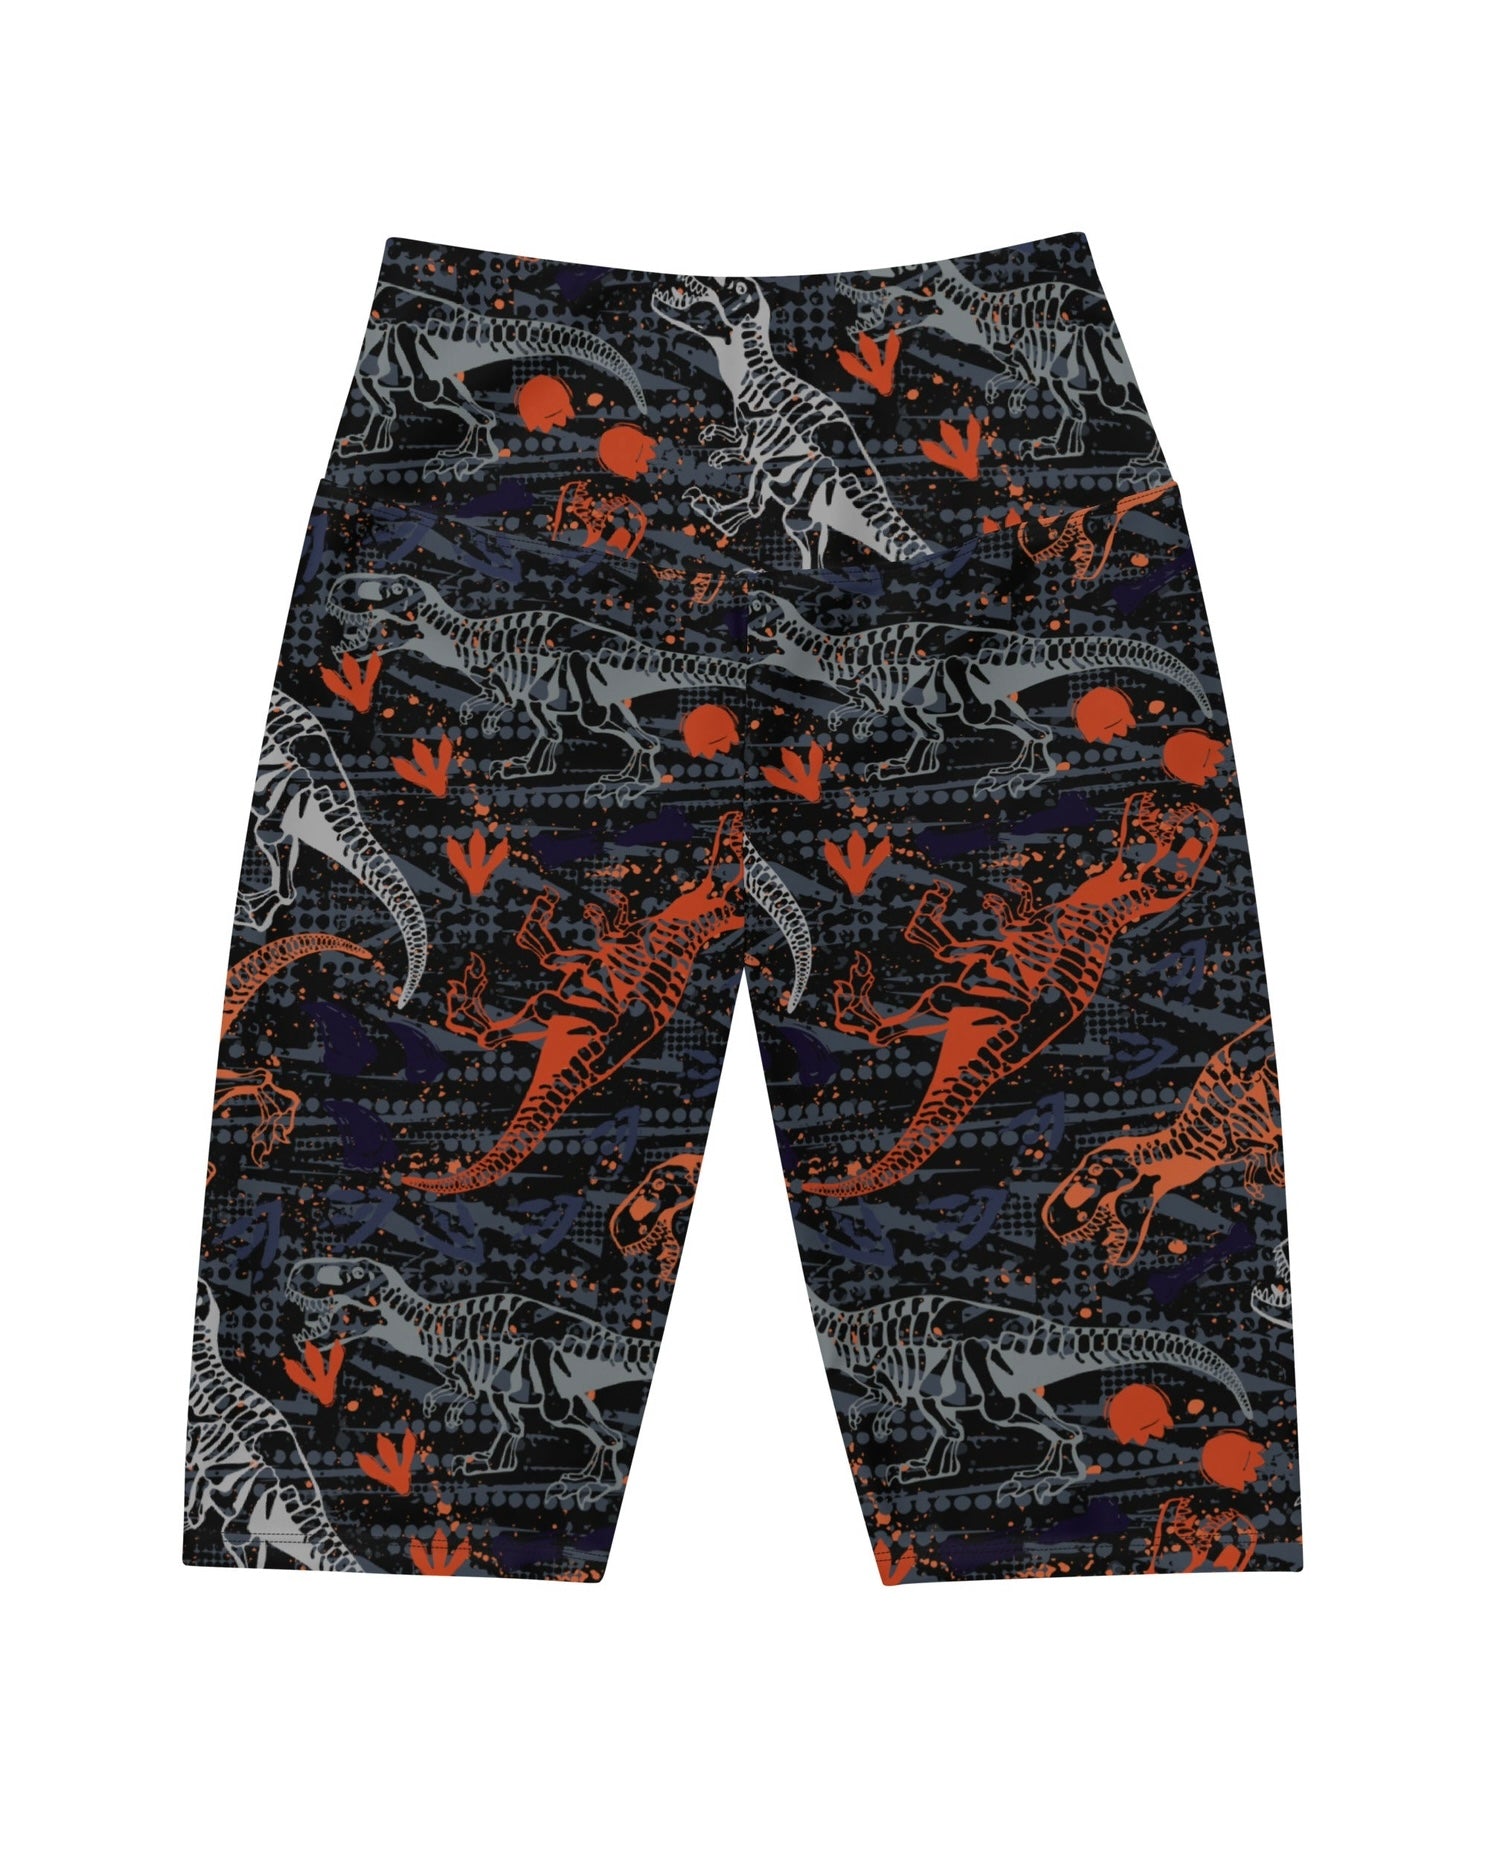 Close-up view of One Stop Rave's T-Wrecked Biker Shorts, showcasing the detailed dinosaur print and high-waisted cut.